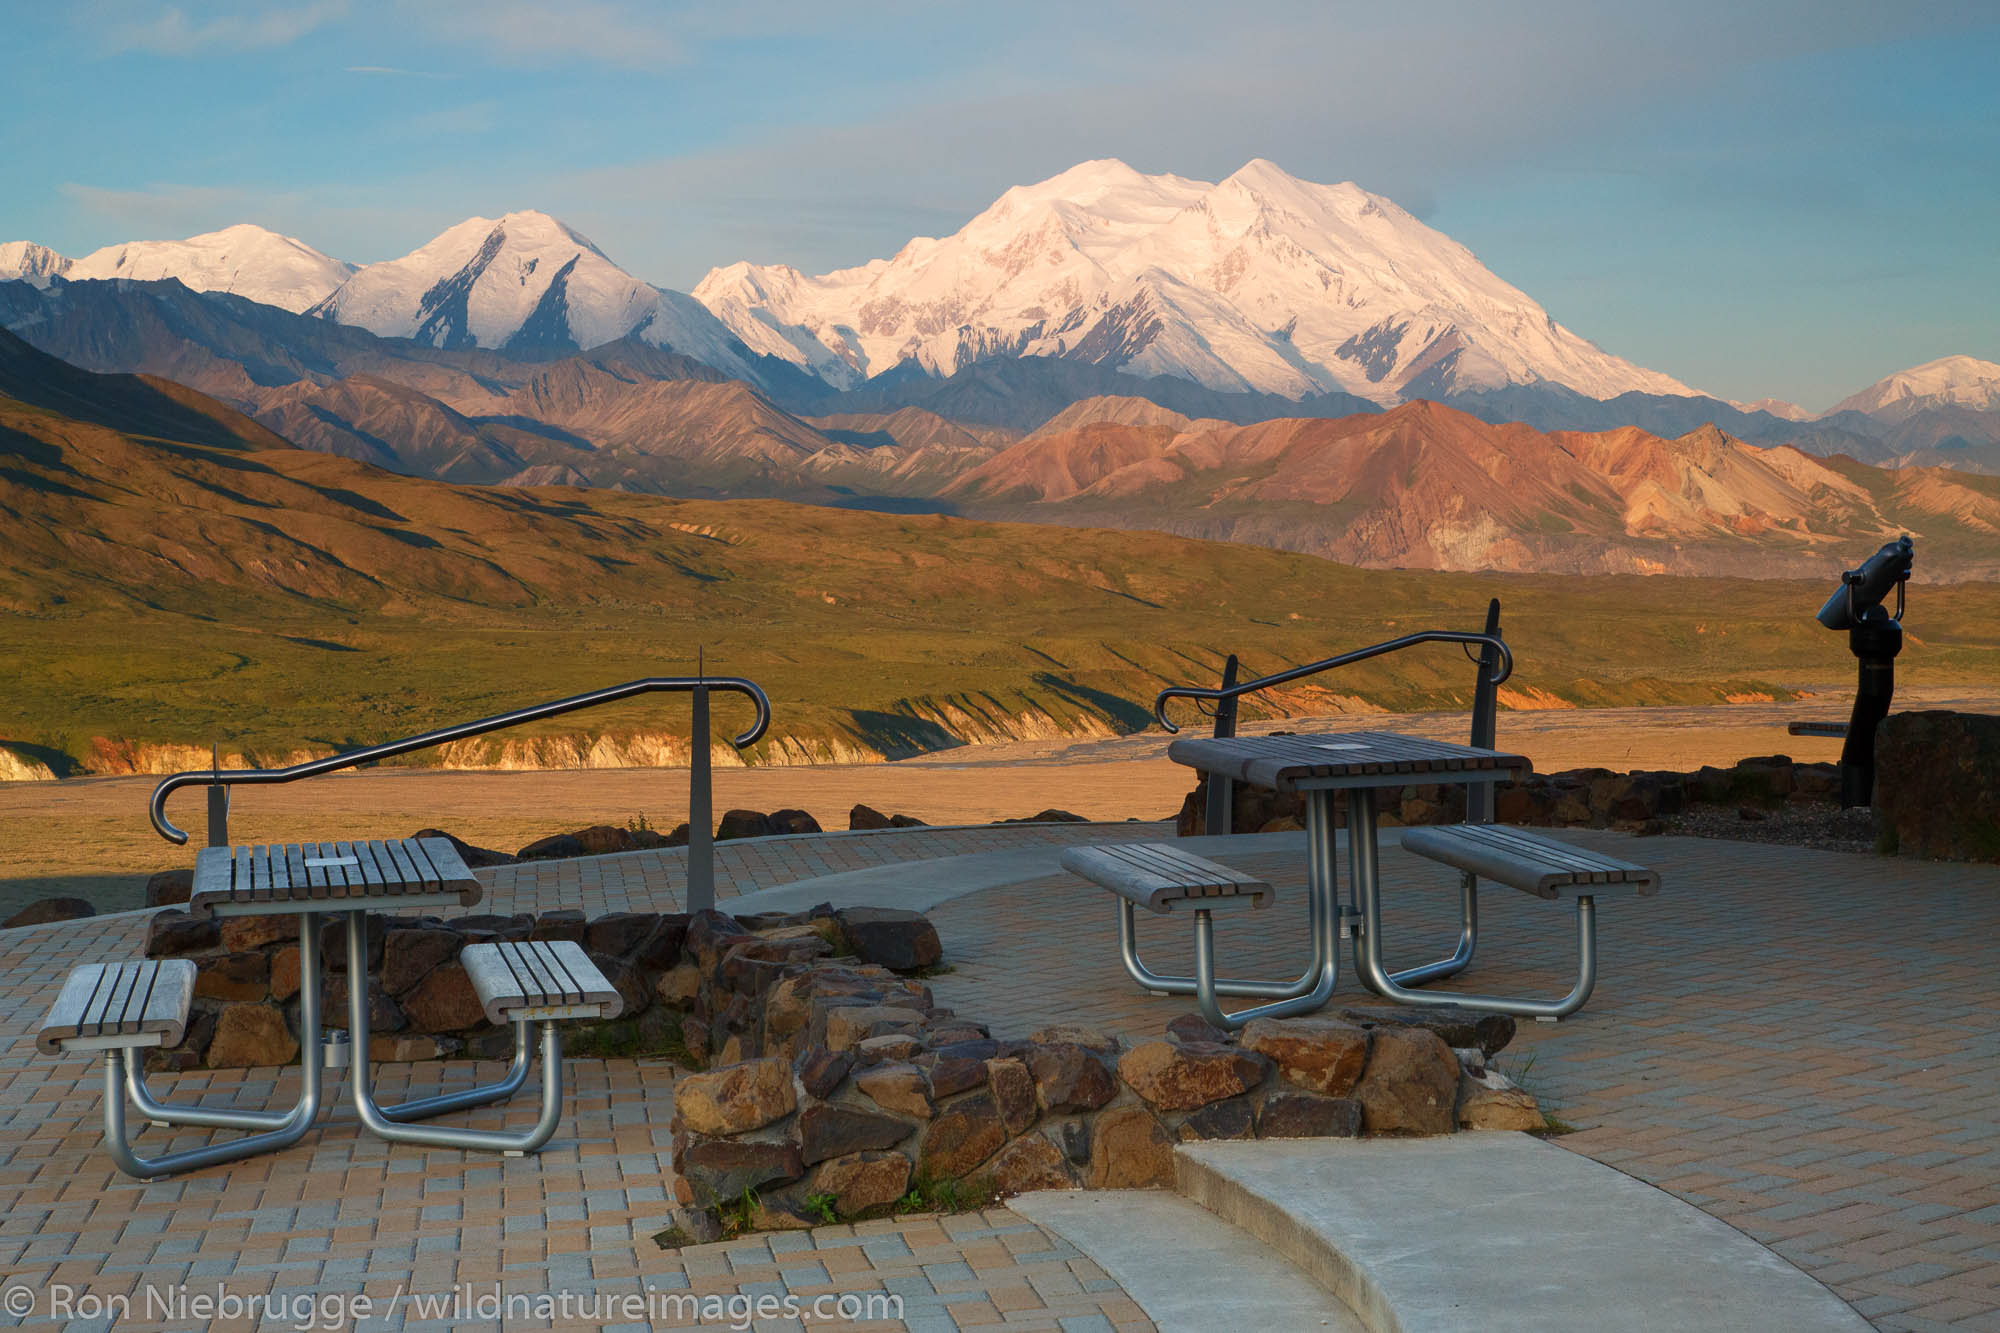 Mt McKinley also known as Denali, from the Eielson Visitor Center, Denali National Park, Alaska.